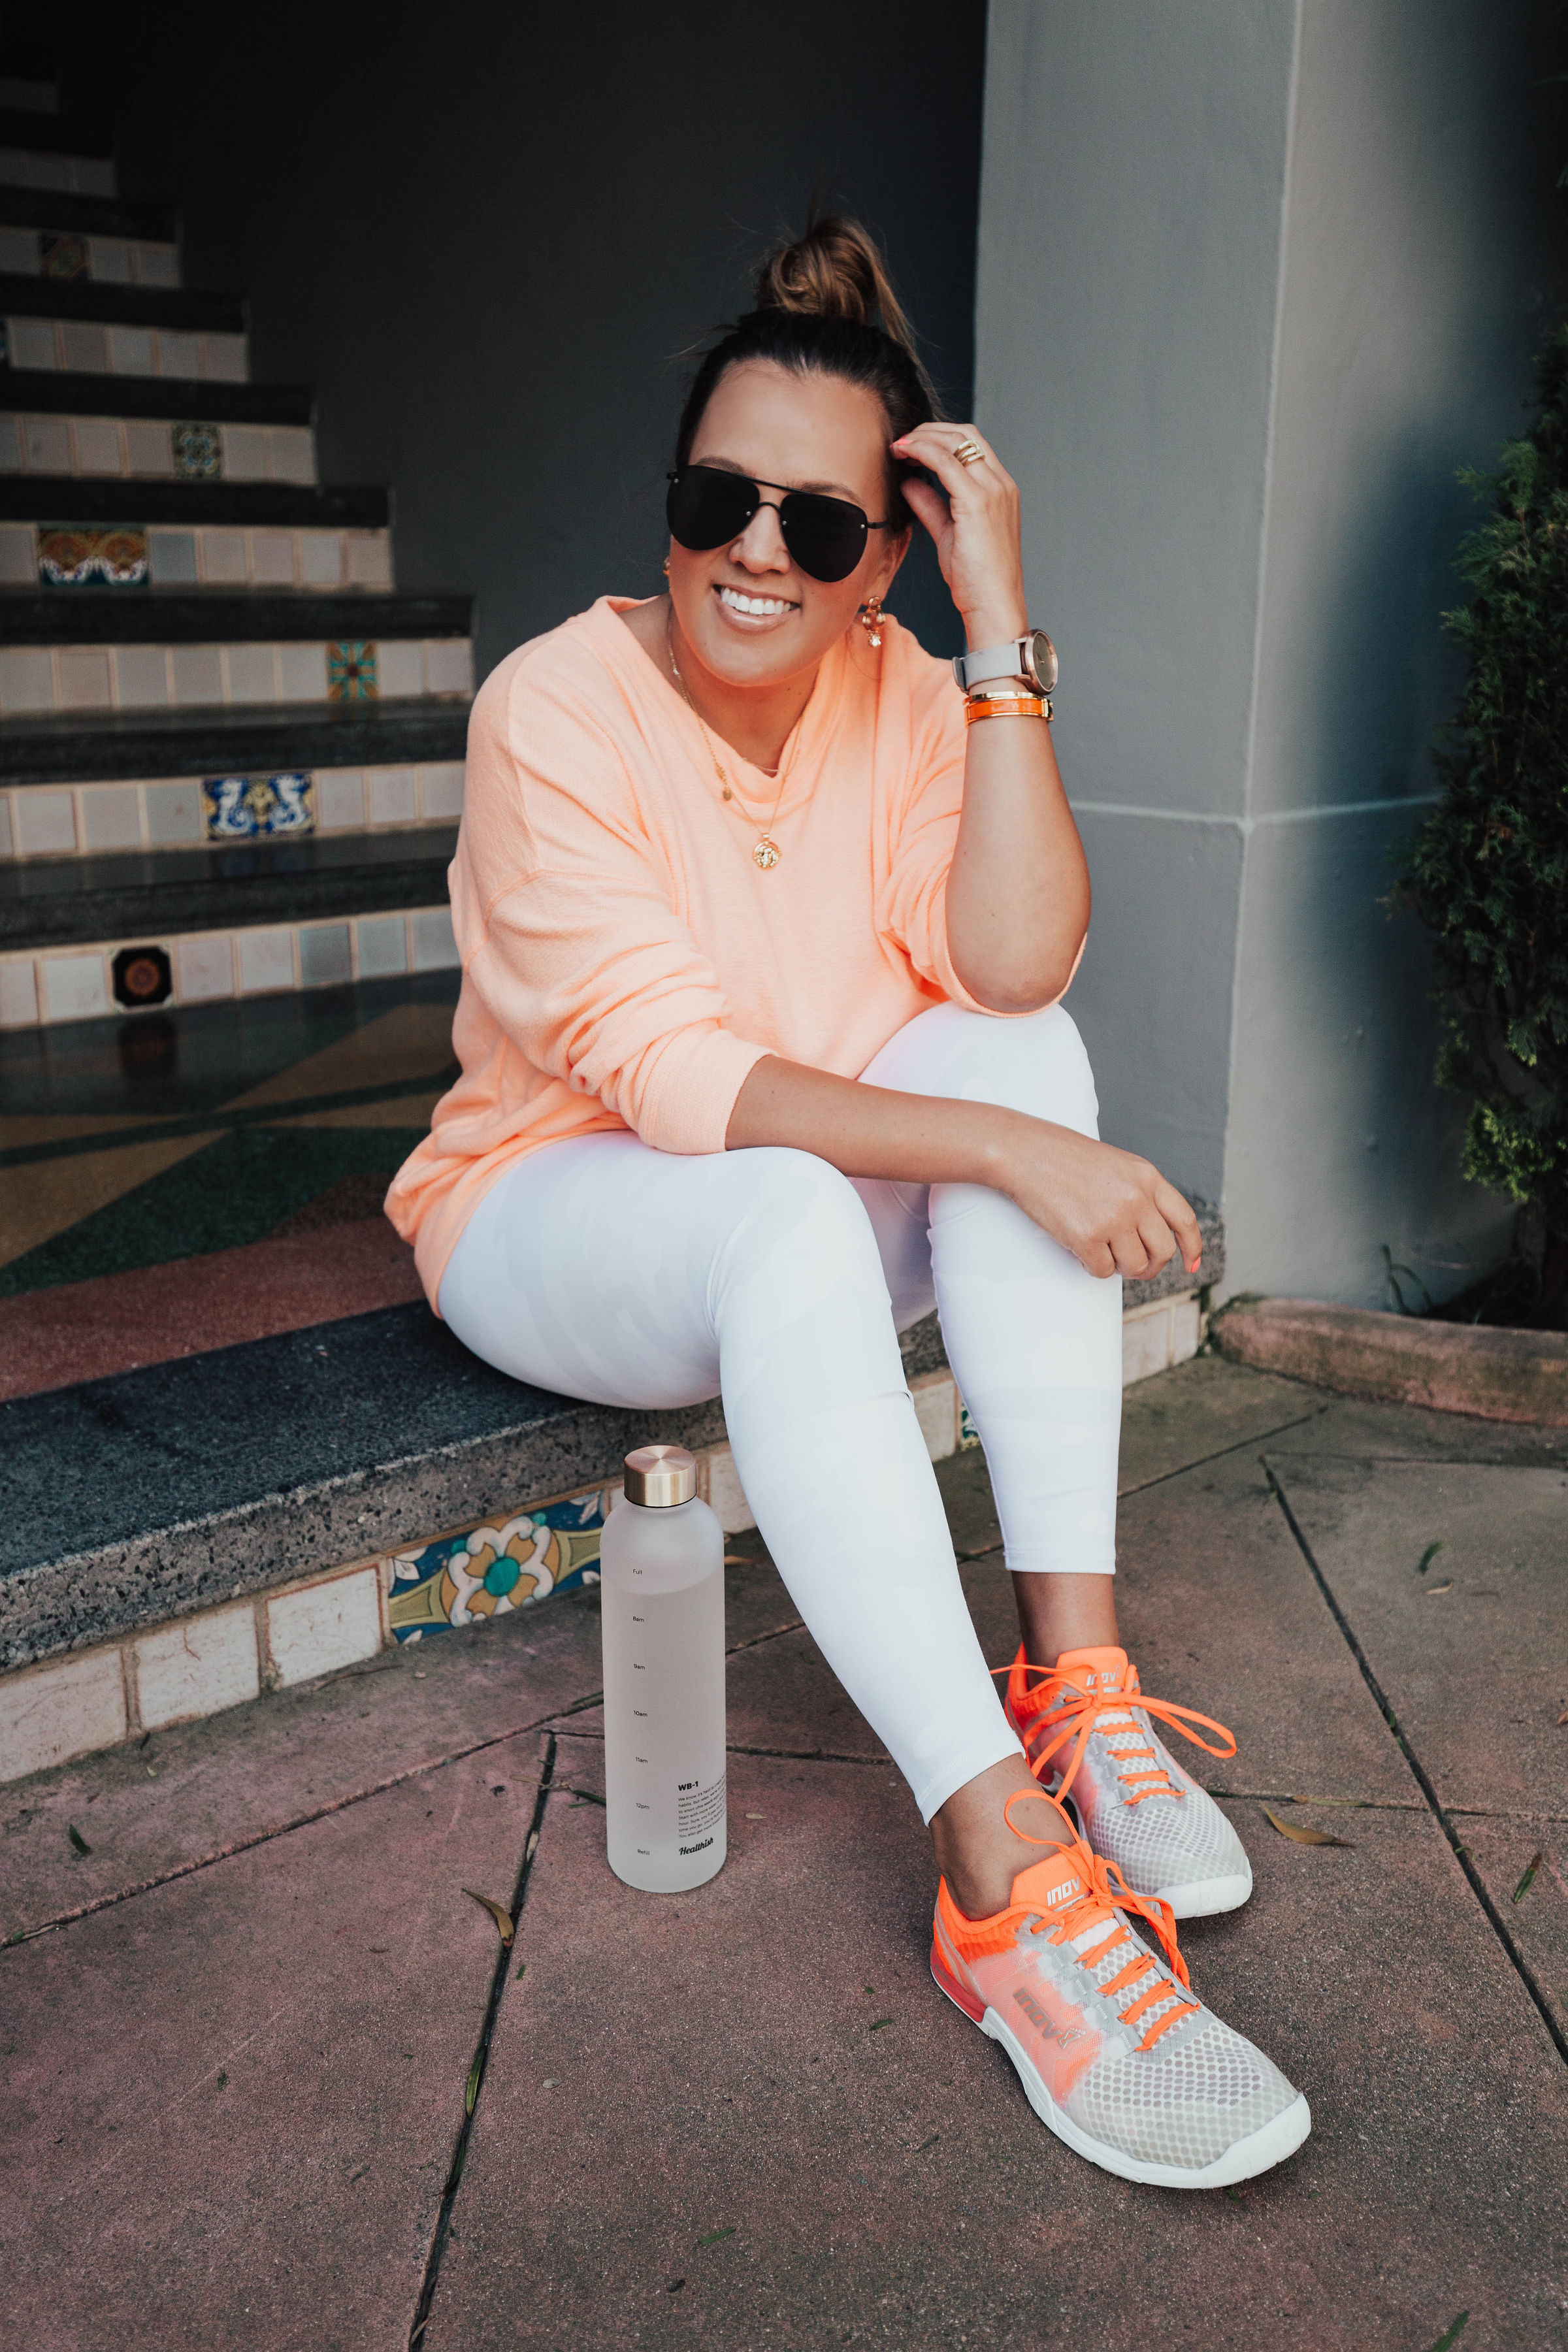 San Francisco blogger Ashley Zeal from Two Peas in a Prada shares her new neon sneakers. She is sharing why these shoes from Inov-8 make for the perfect cross trainer!